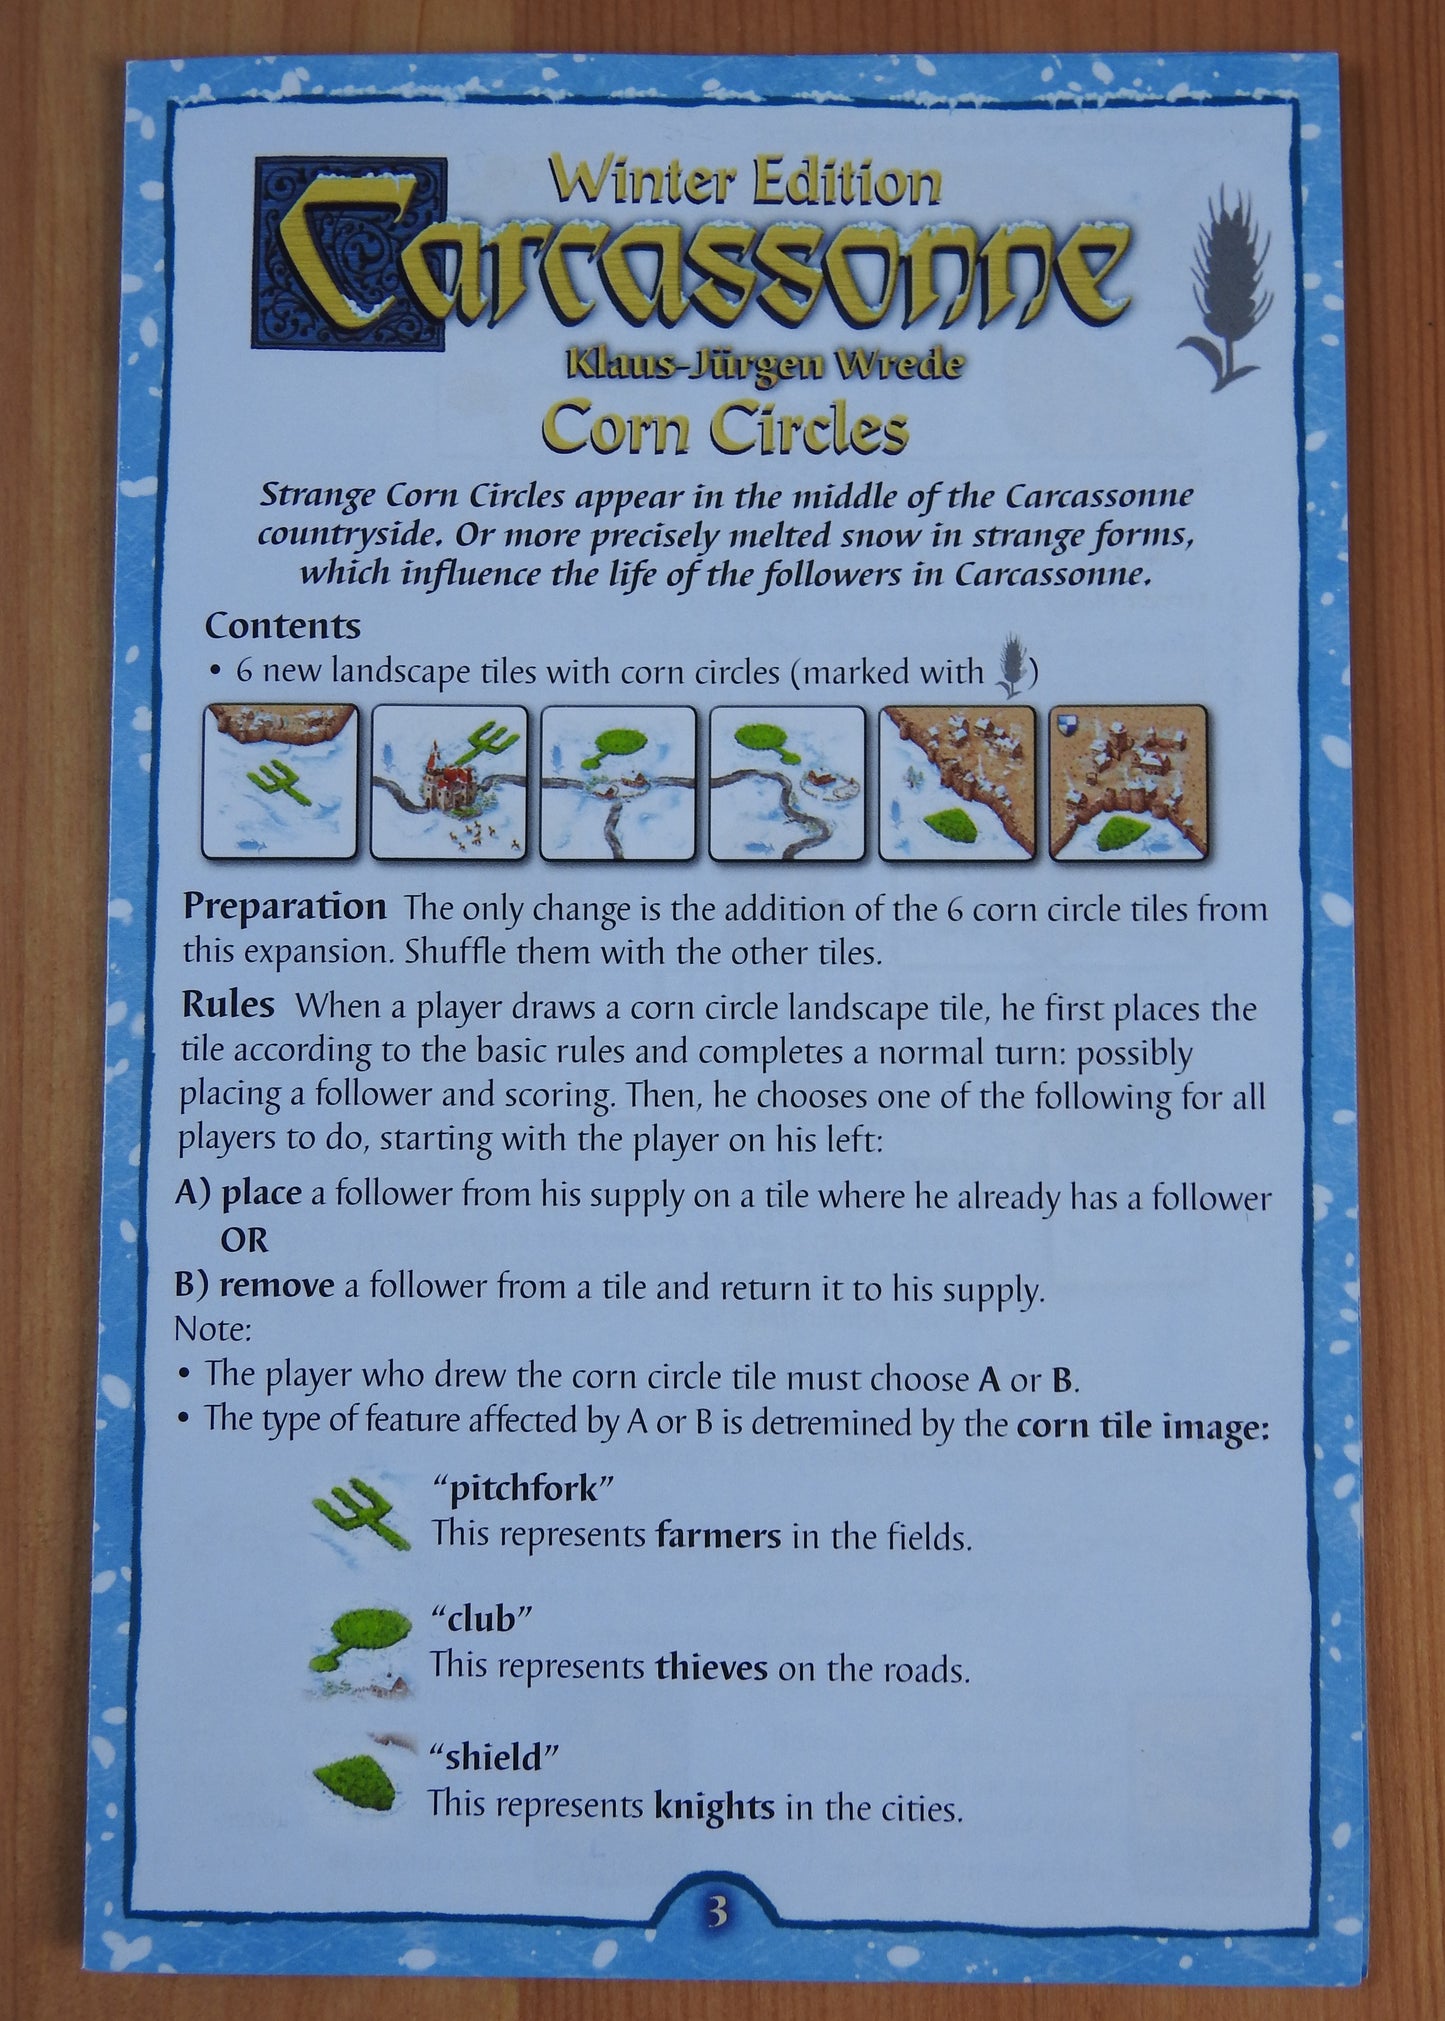 View of the English rules for the mini expansion.